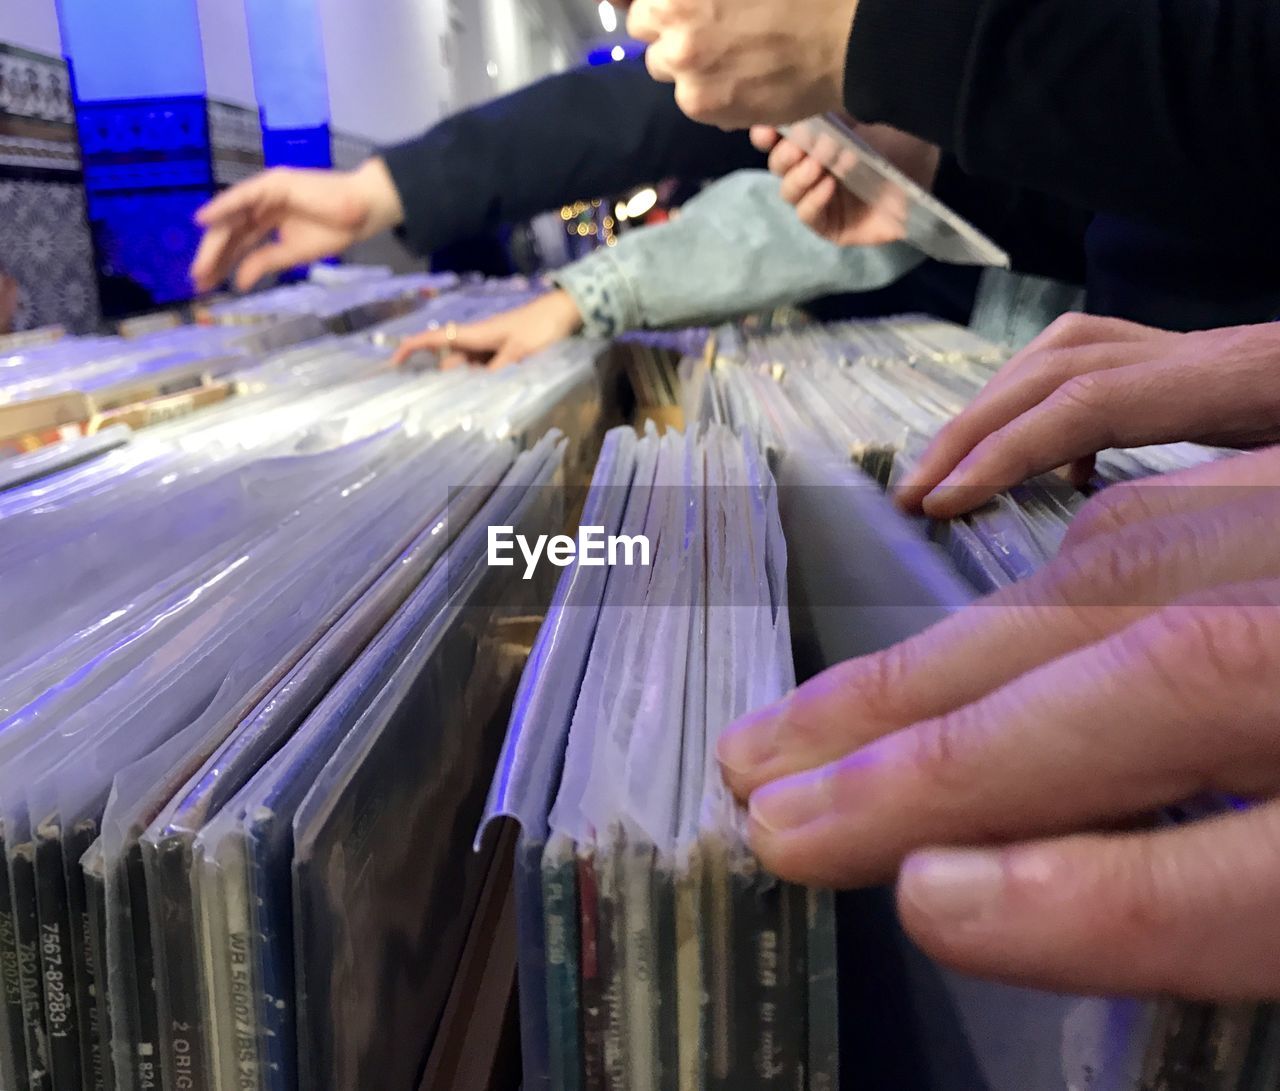 Midsection of people looking at vinyl records